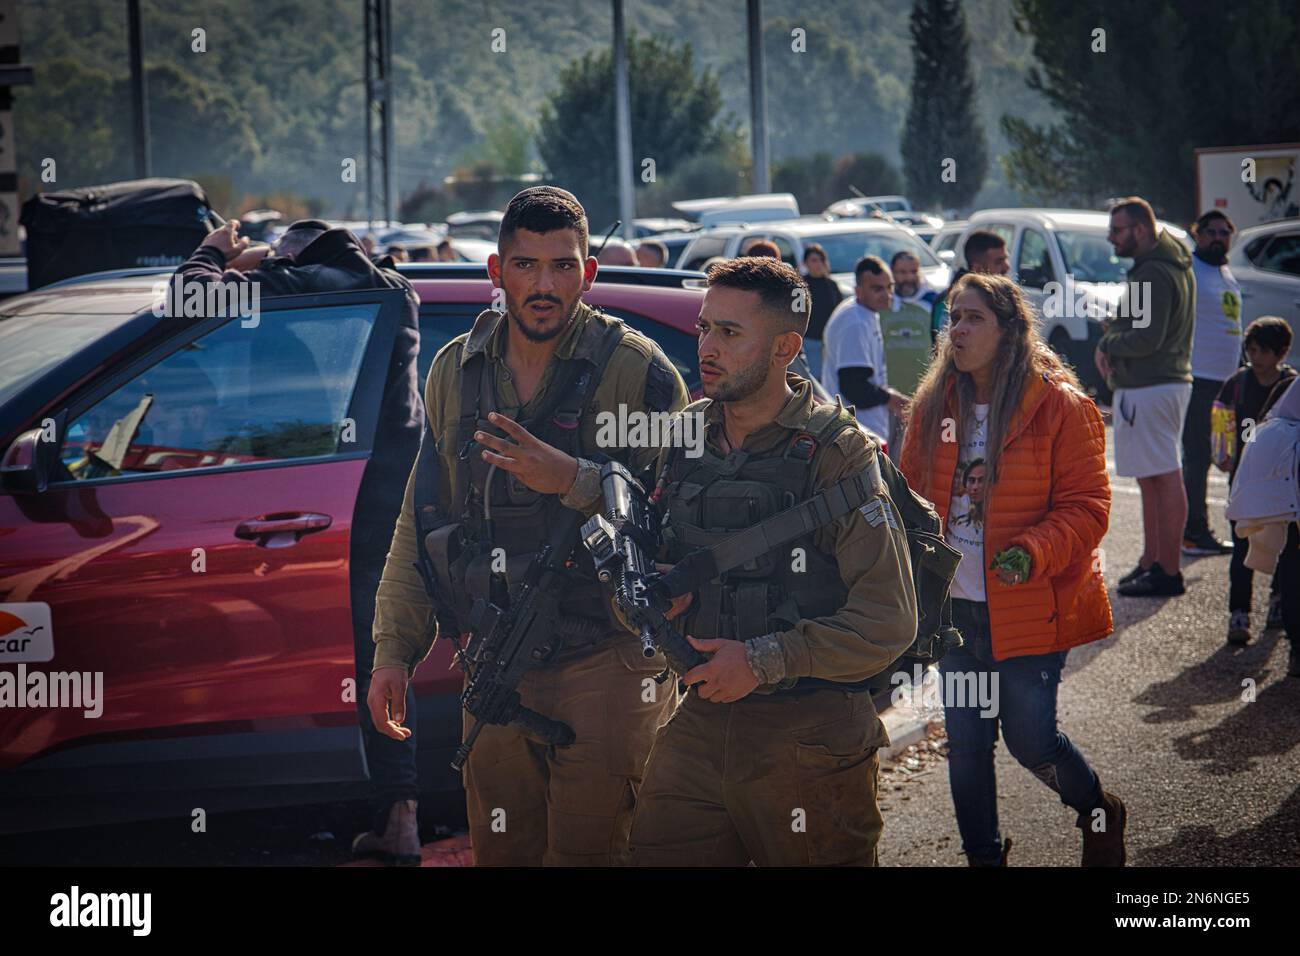 Two Golani soldiers in uniform walking during a demonstration with guns Stock Photo